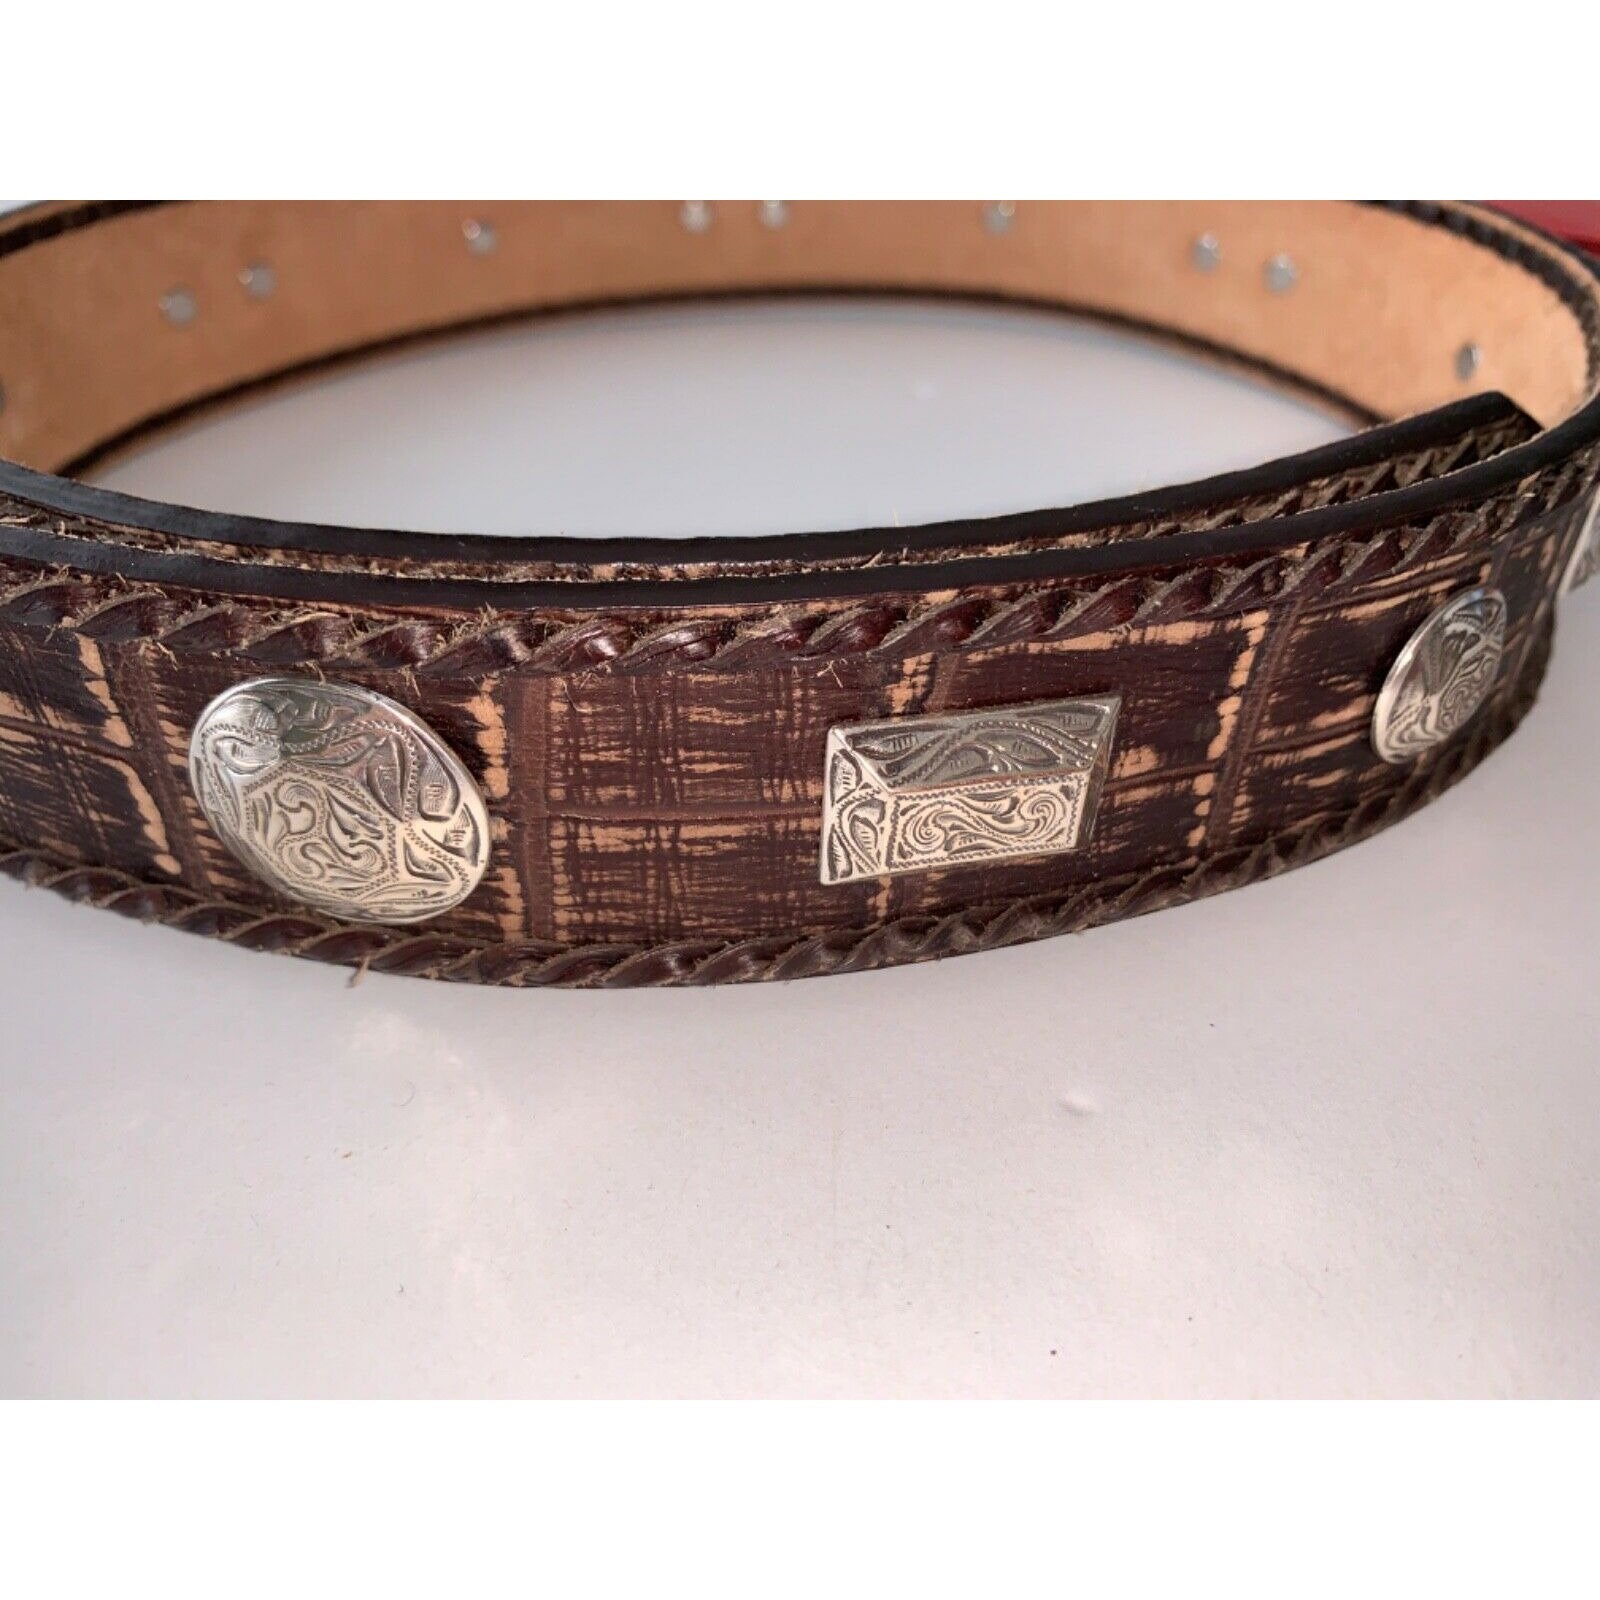 BRIGHTON 32 silver buckle wide leather belt brown medallions